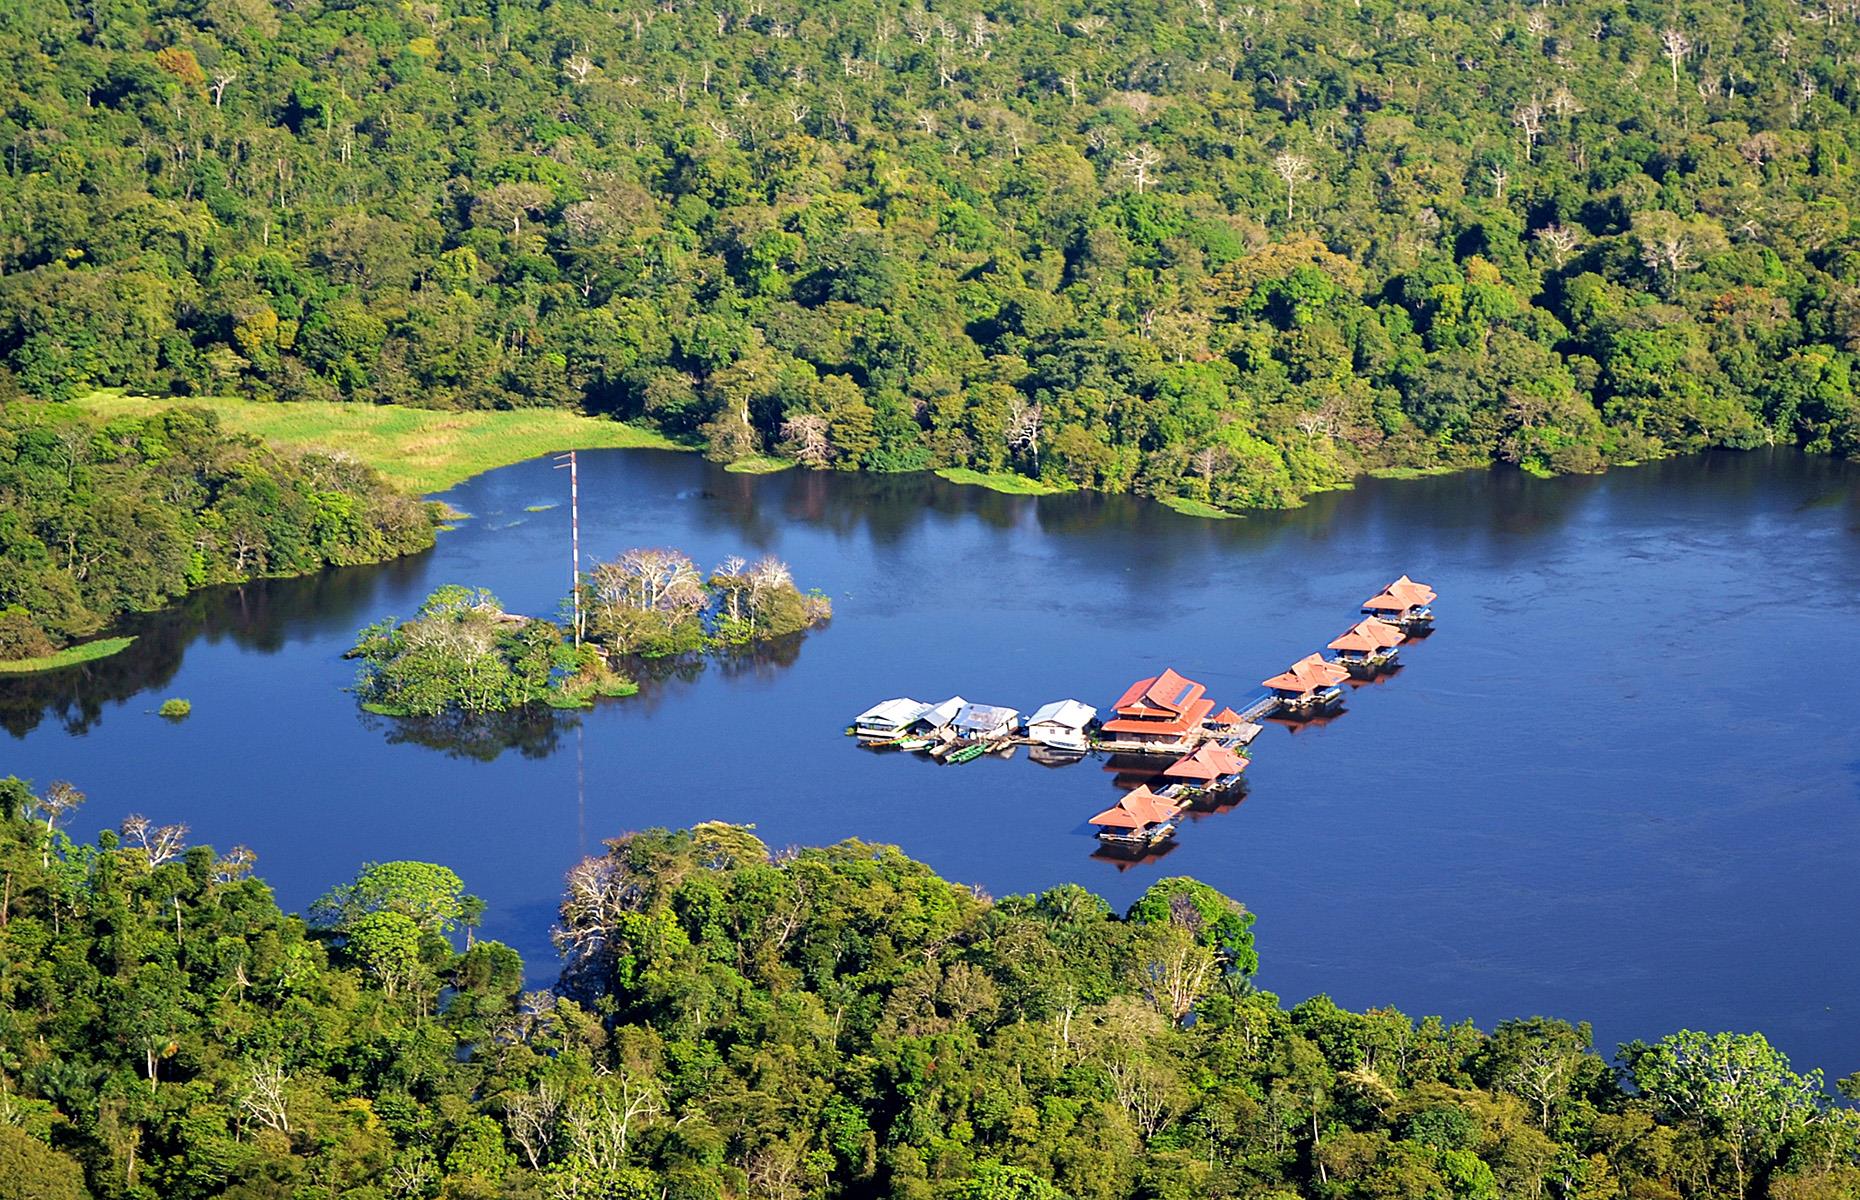 <p>Deep in the Brazilian Amazon's Várzea – a flooded forest – <a href="https://www.uakarilodge.com.br">this floating lodge</a> is the place to stay if wildlife is your bag. Right in the thick of the Mamirauá Sustainable Development Reserve, the lodge is surrounded by a bio-diverse wilderness where monkeys swing in the tree canopies and sloths idle on branches.</p>